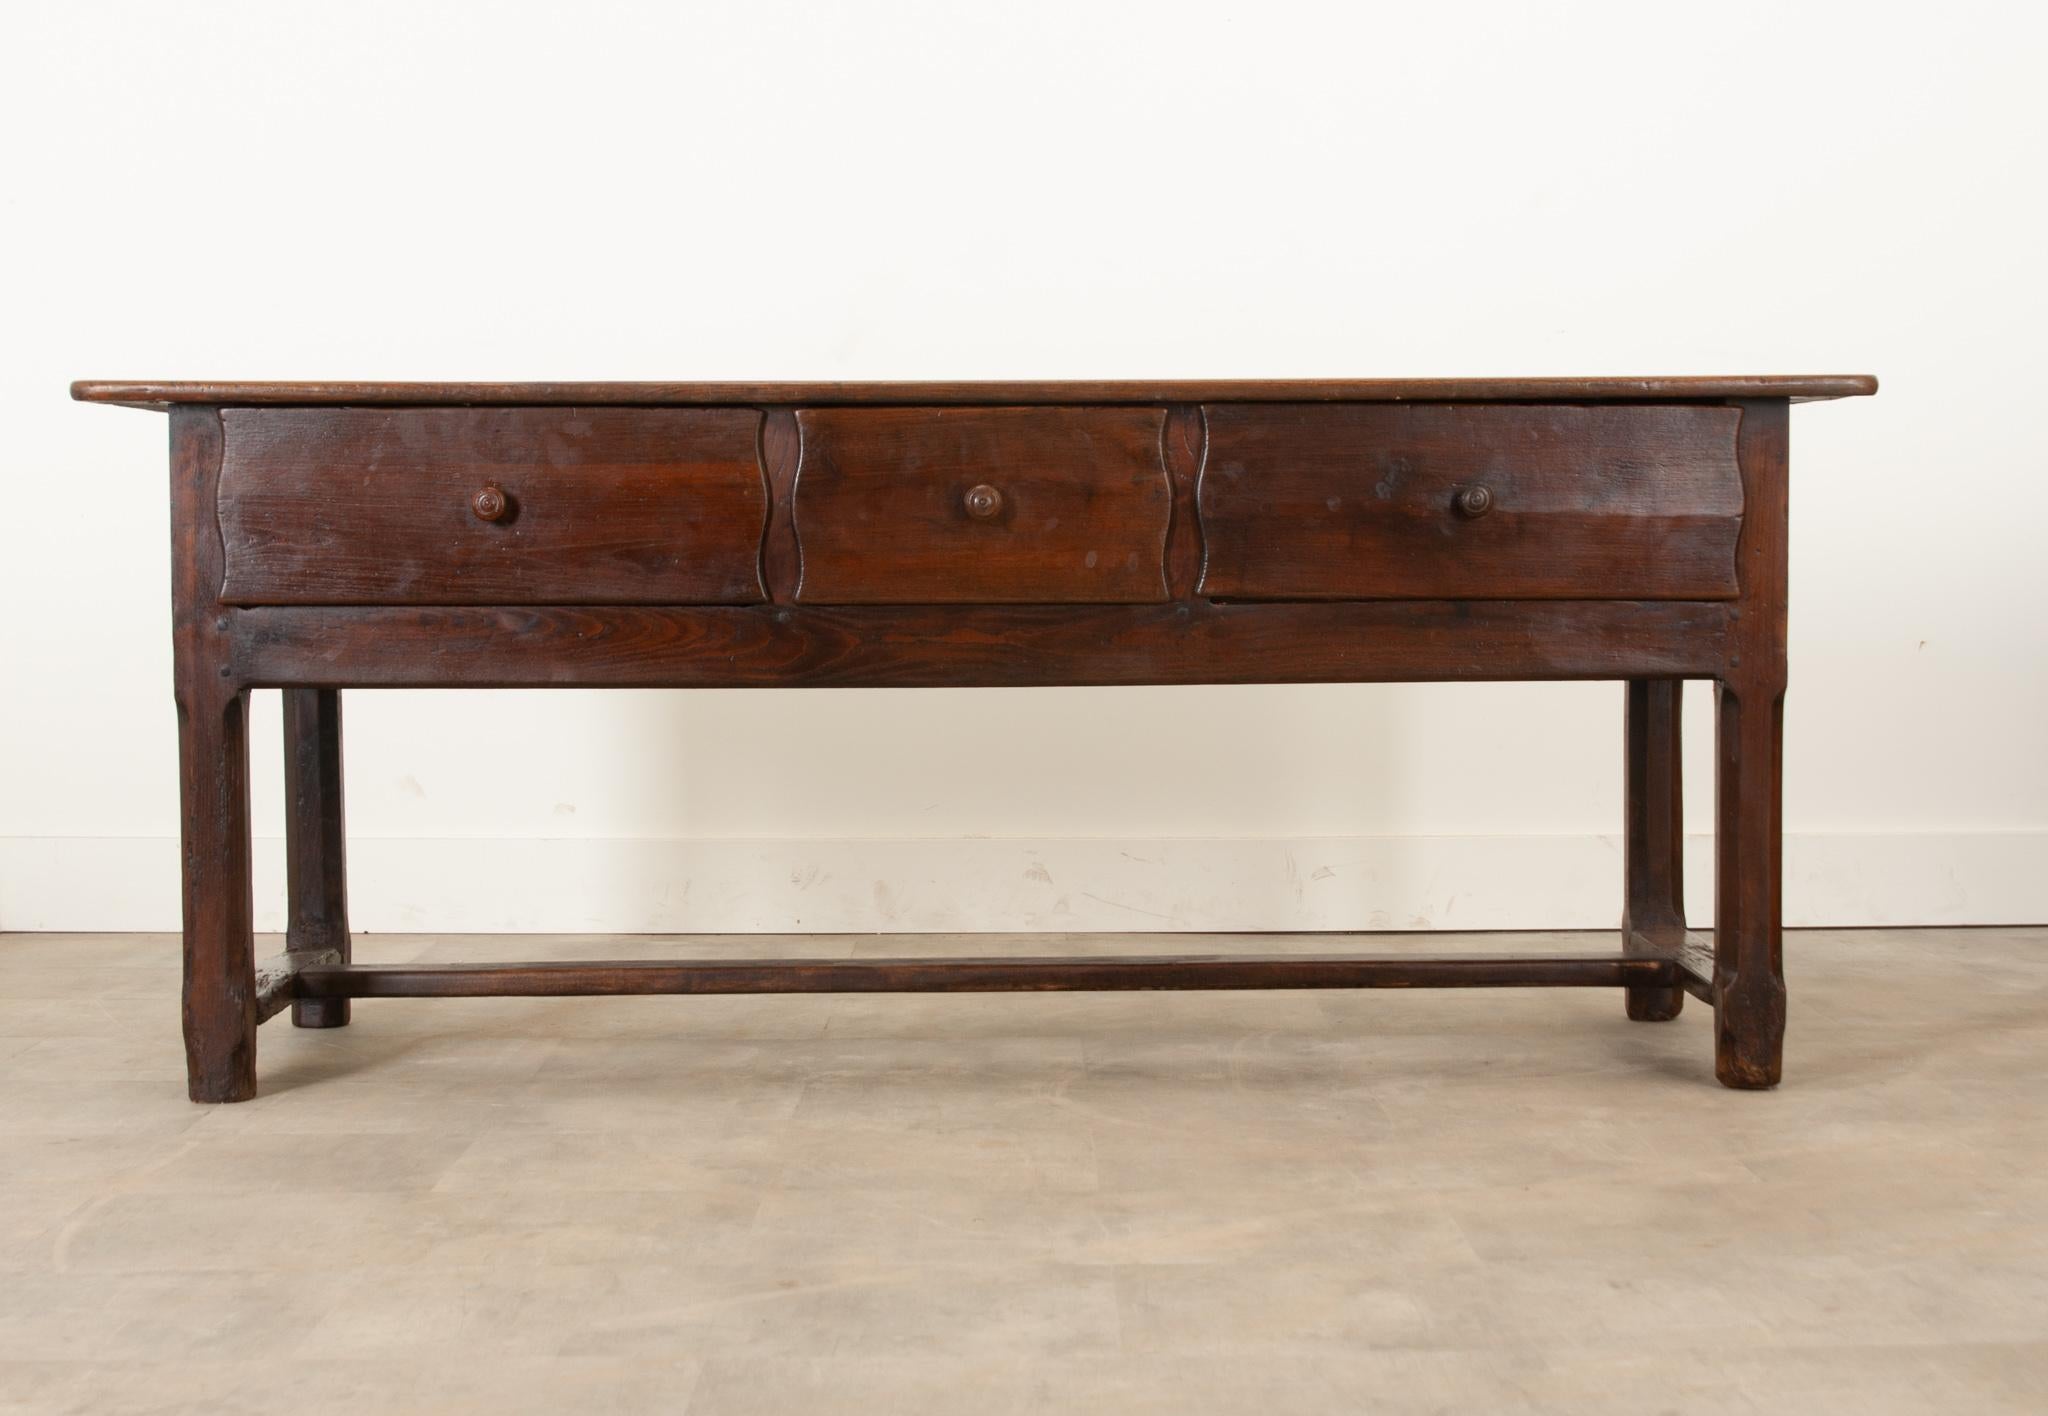 Crafted circa 1800 in England, this handsome server is the perfect provincial touch to any space. The solid chestnut has gained a fantastic patina. The top showcases the distinctive wood grain beautifully. Three drawers with scalloped edges are